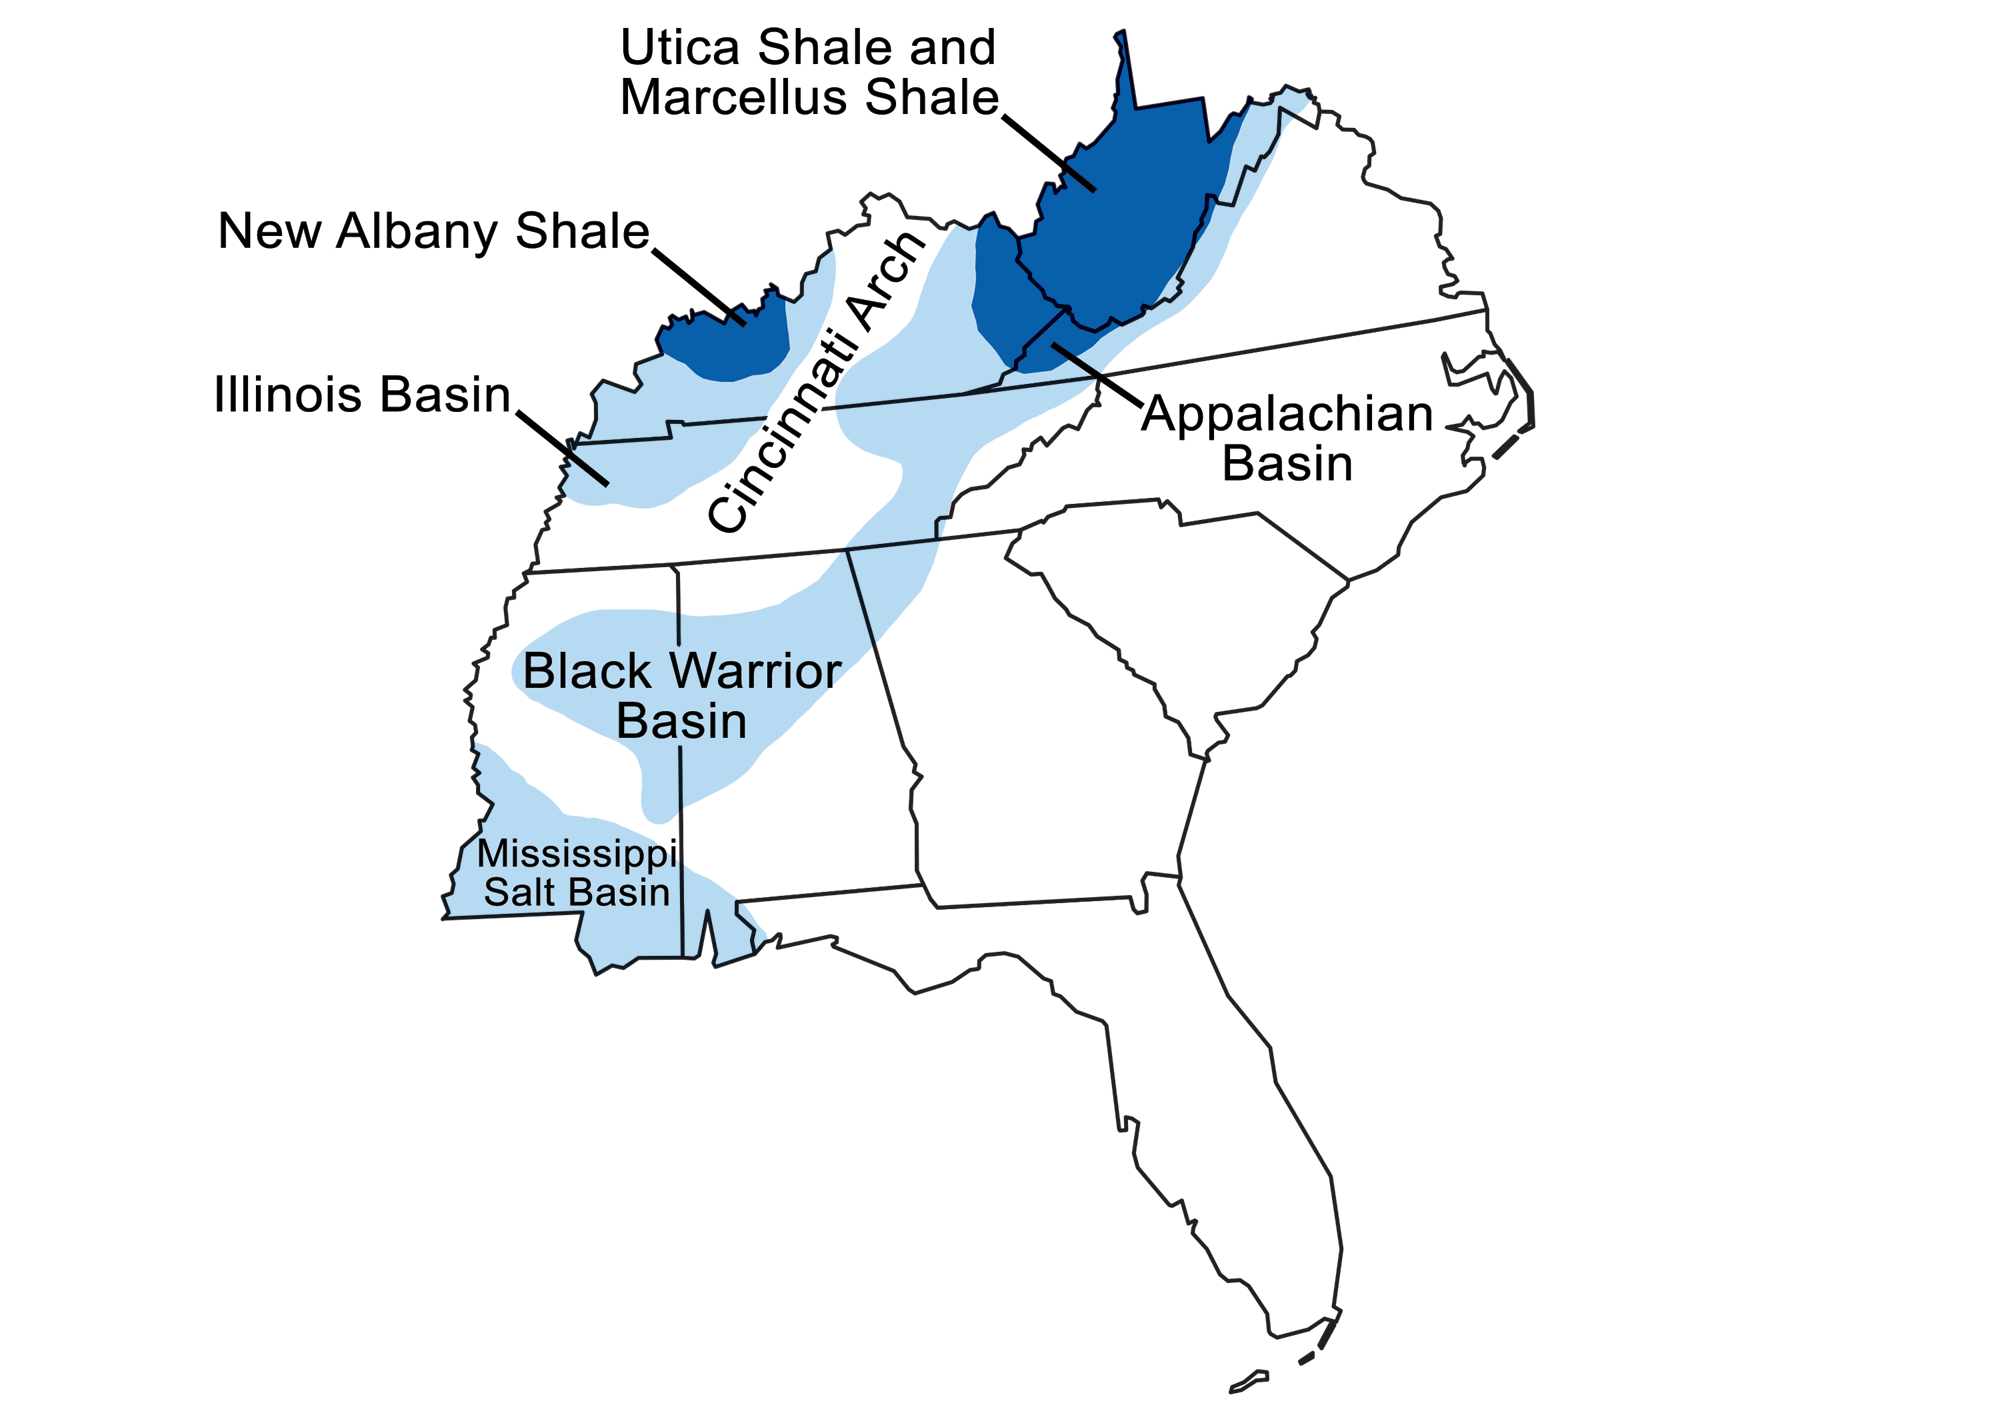 Map showing the sedimentary basins with fossil fuel deposits in the Southeastern US.